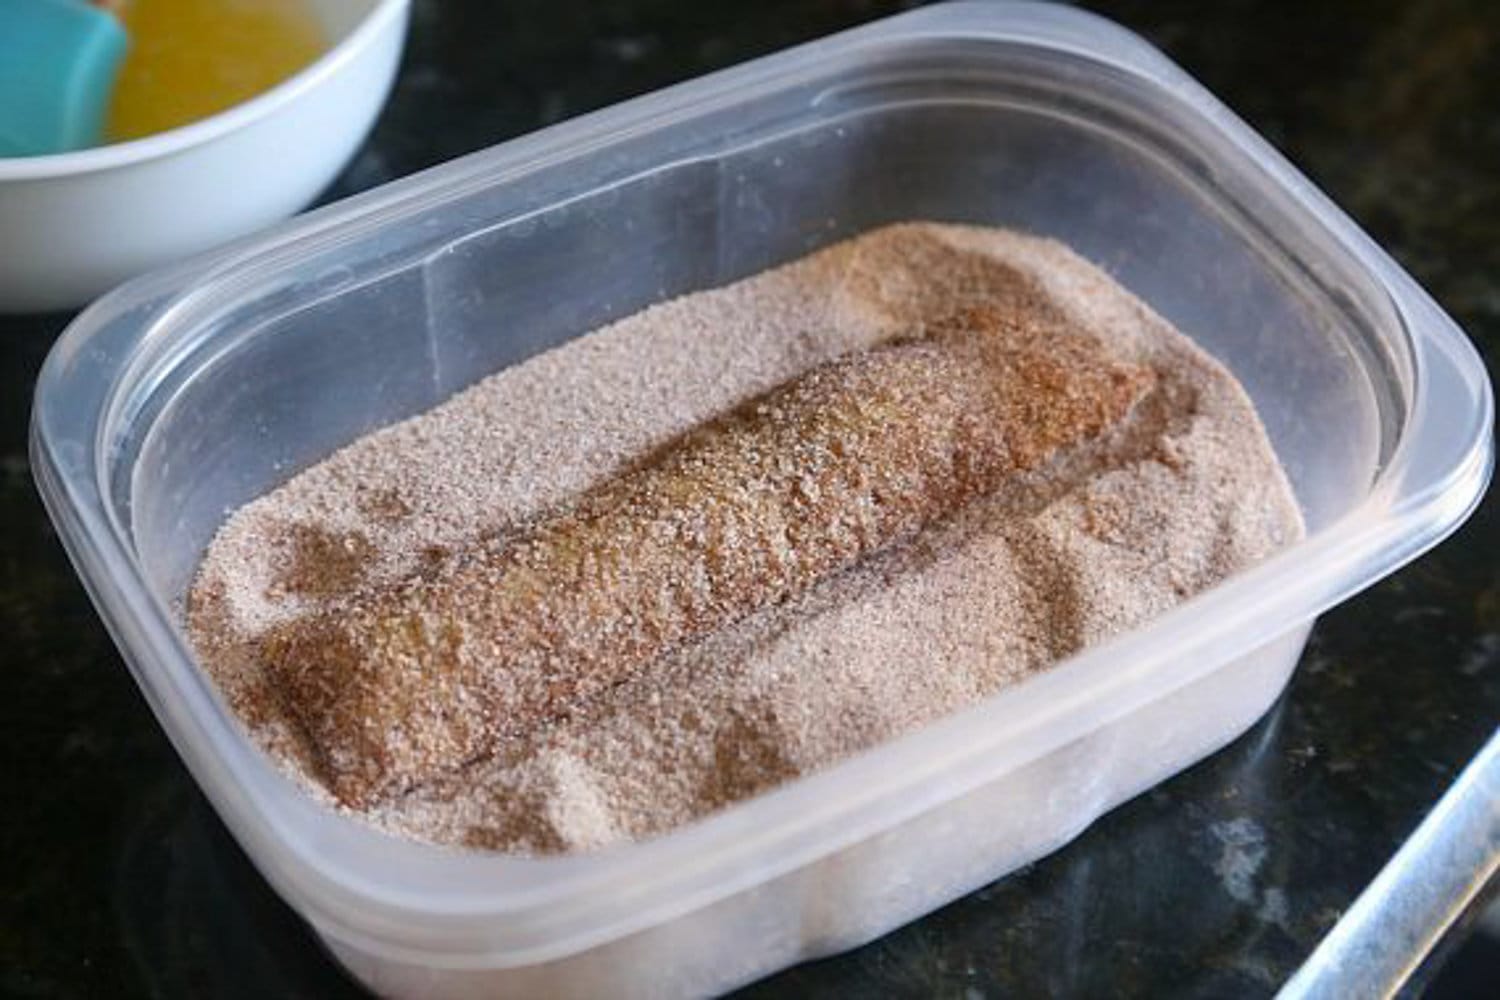 Dipping butter-coated churro into cinnamon sugar